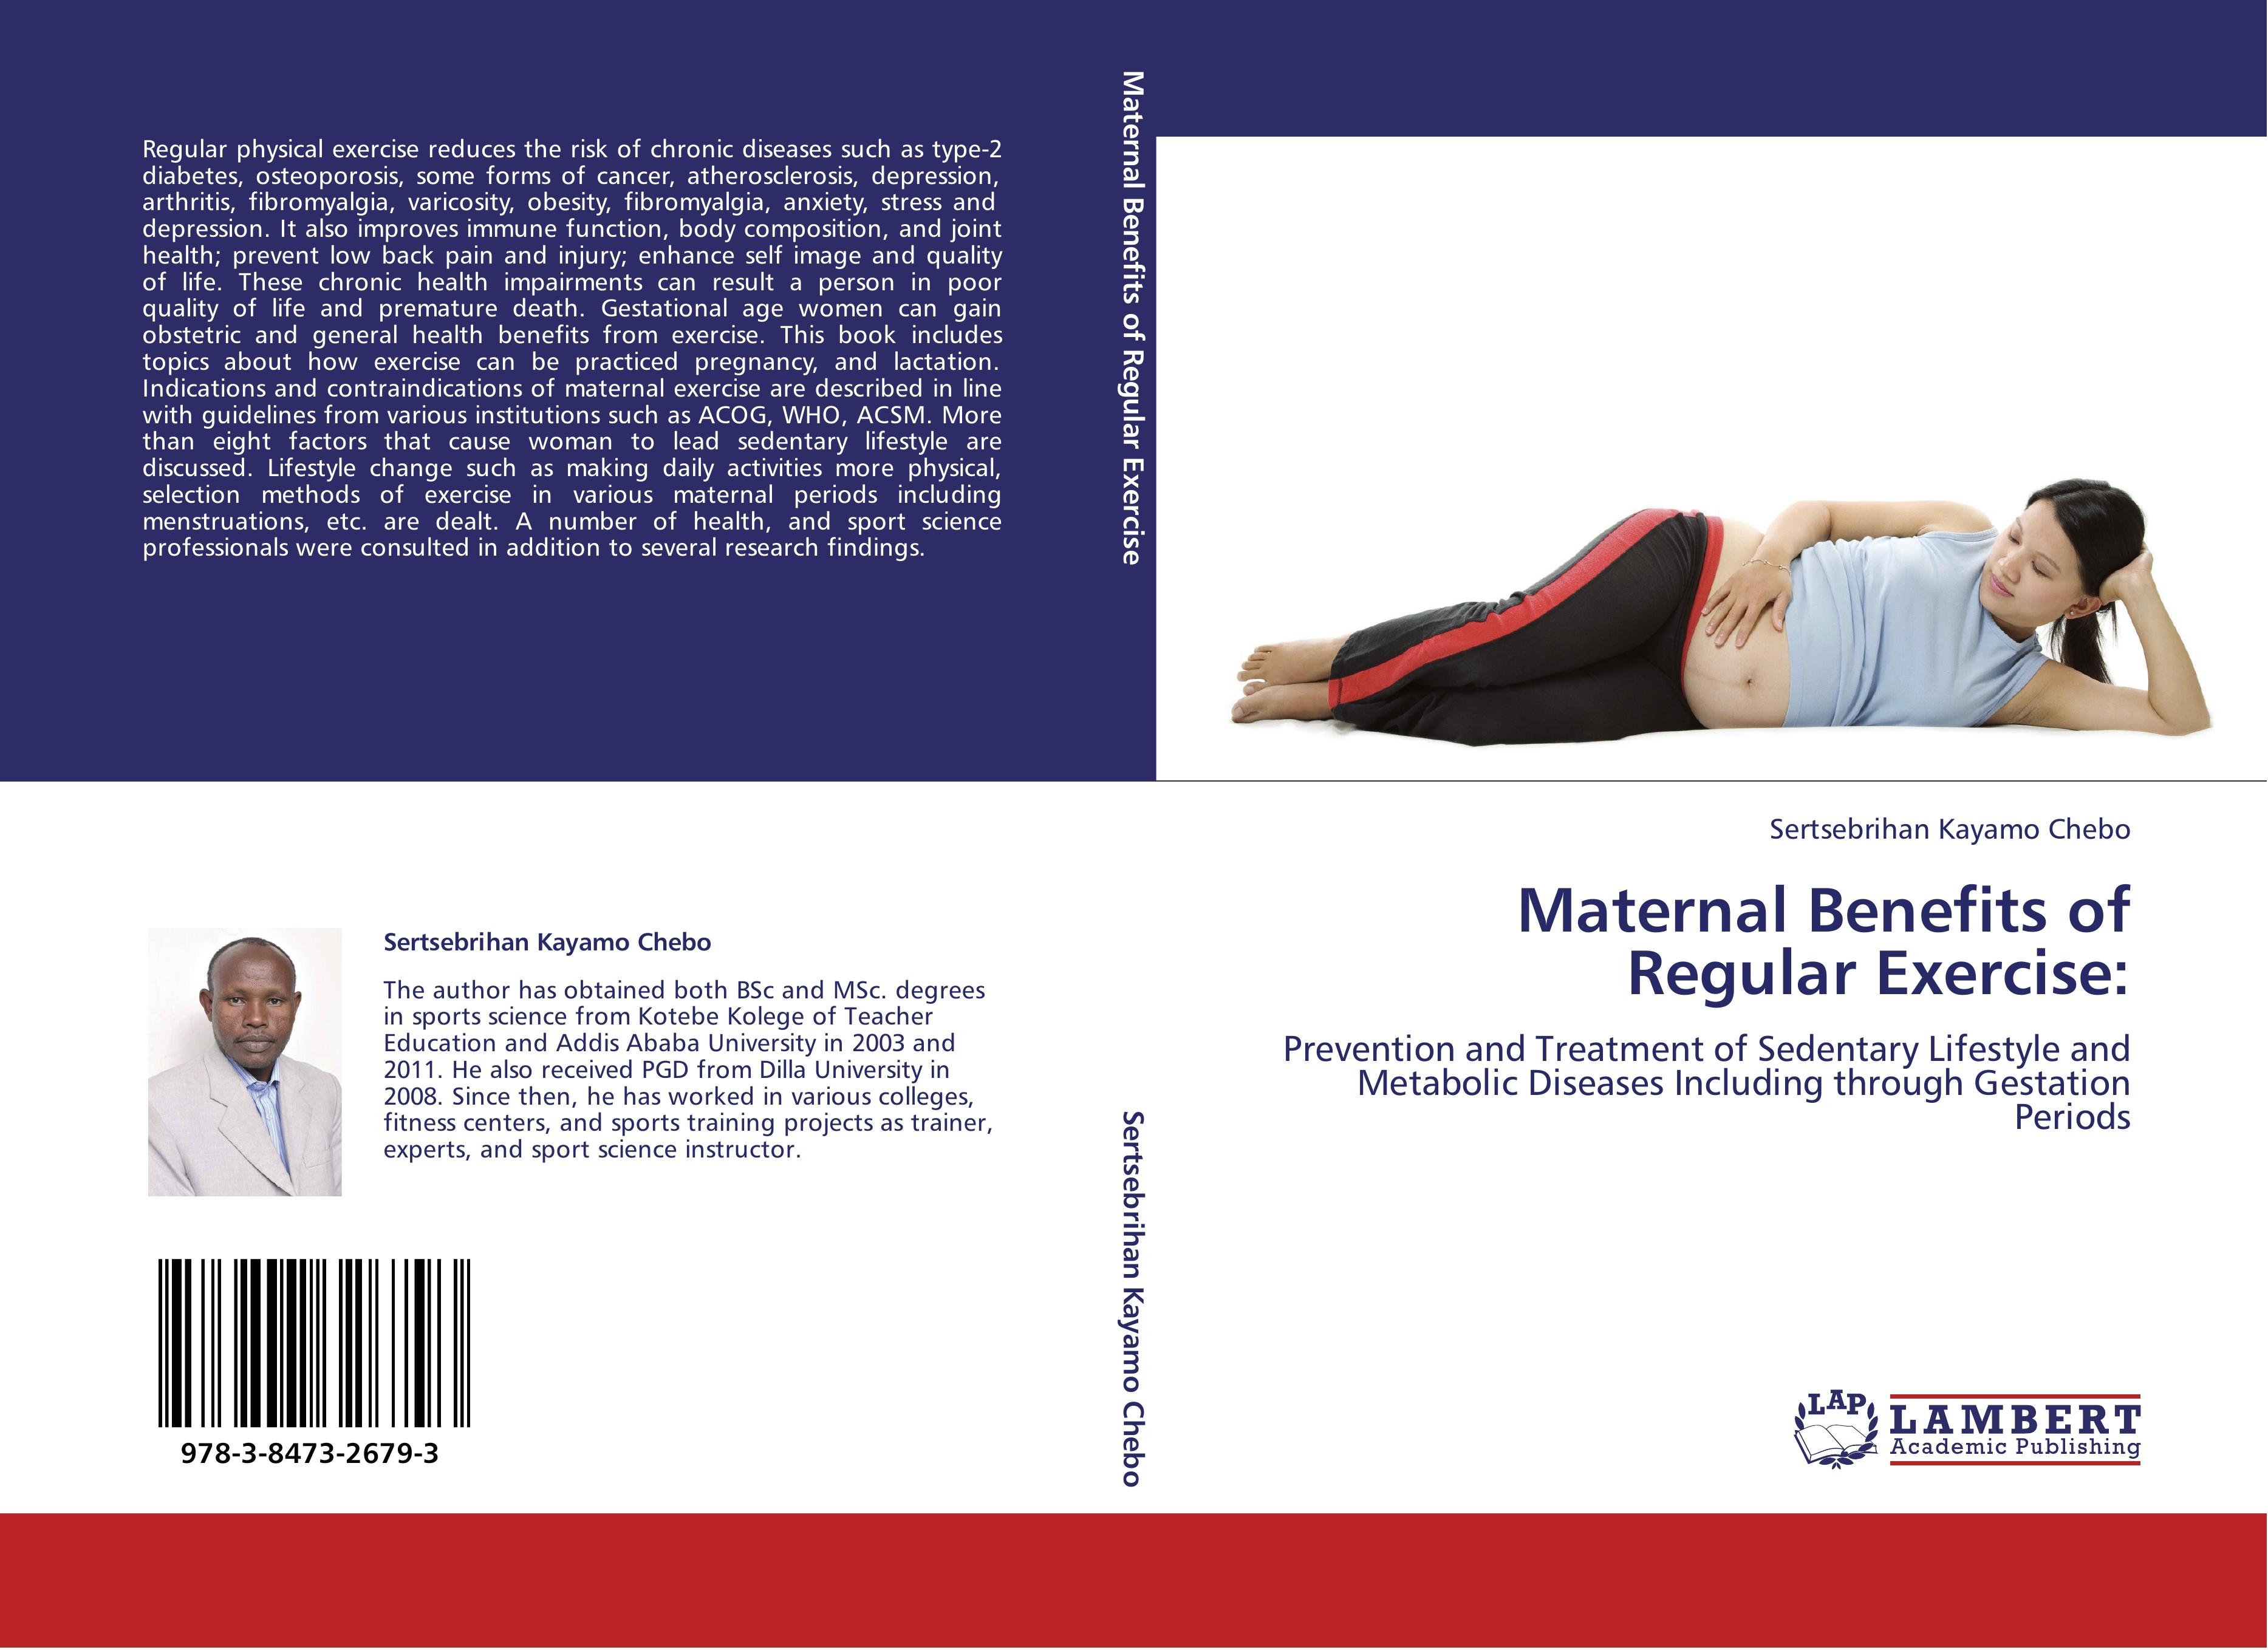 Maternal Benefits of Regular Exercise: / Prevention and Treatment of Sedentary Lifestyle and Metabolic Diseases Including through Gestation Periods / Sertsebrihan Kayamo Chebo / Taschenbuch / 124 S. - Kayamo Chebo, Sertsebrihan